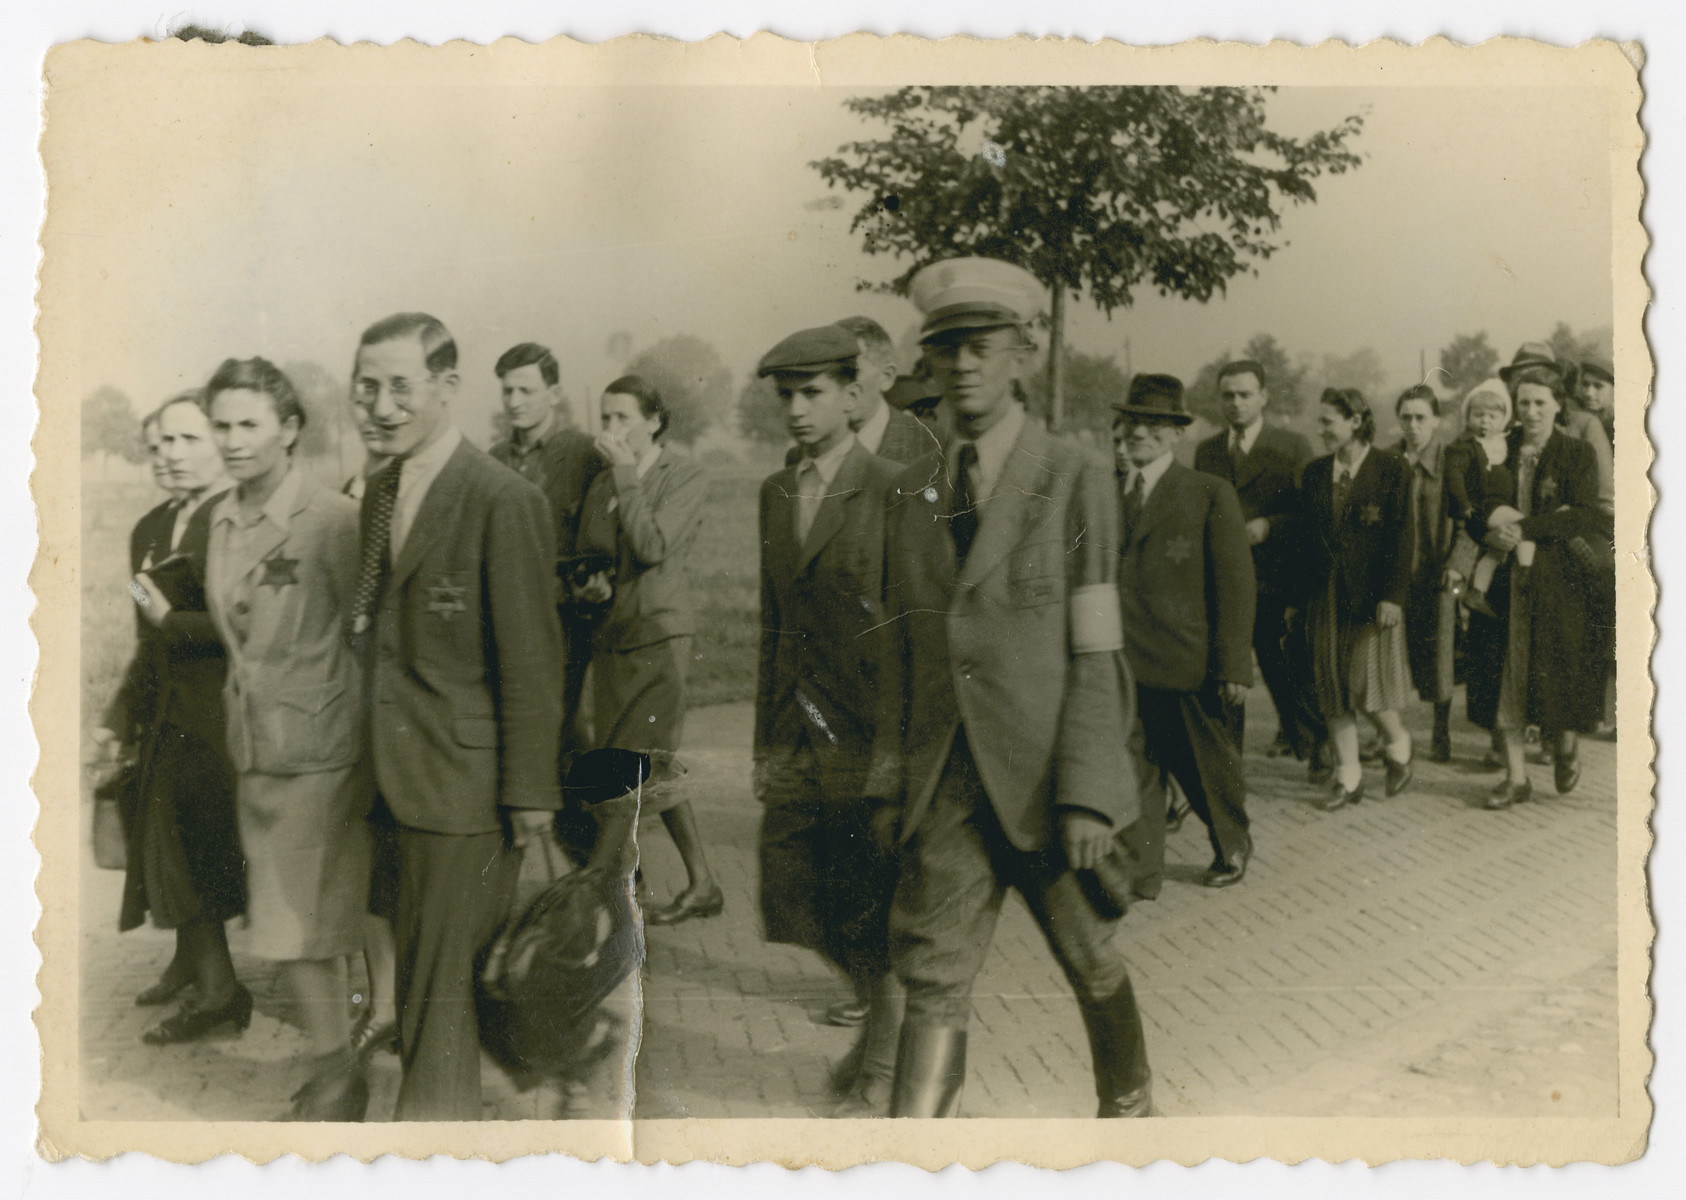 Jews march down a street in Bedzin accmpanied by a Jewish policeman.

Henri and Esther Borzykowski (nee Fiszer) pictured in the back right walk in a line during their time in Bedzin. The two married before the war and survived the camps. Esther's father Srul Fiszer is pictured in front of the couple in a top hat.